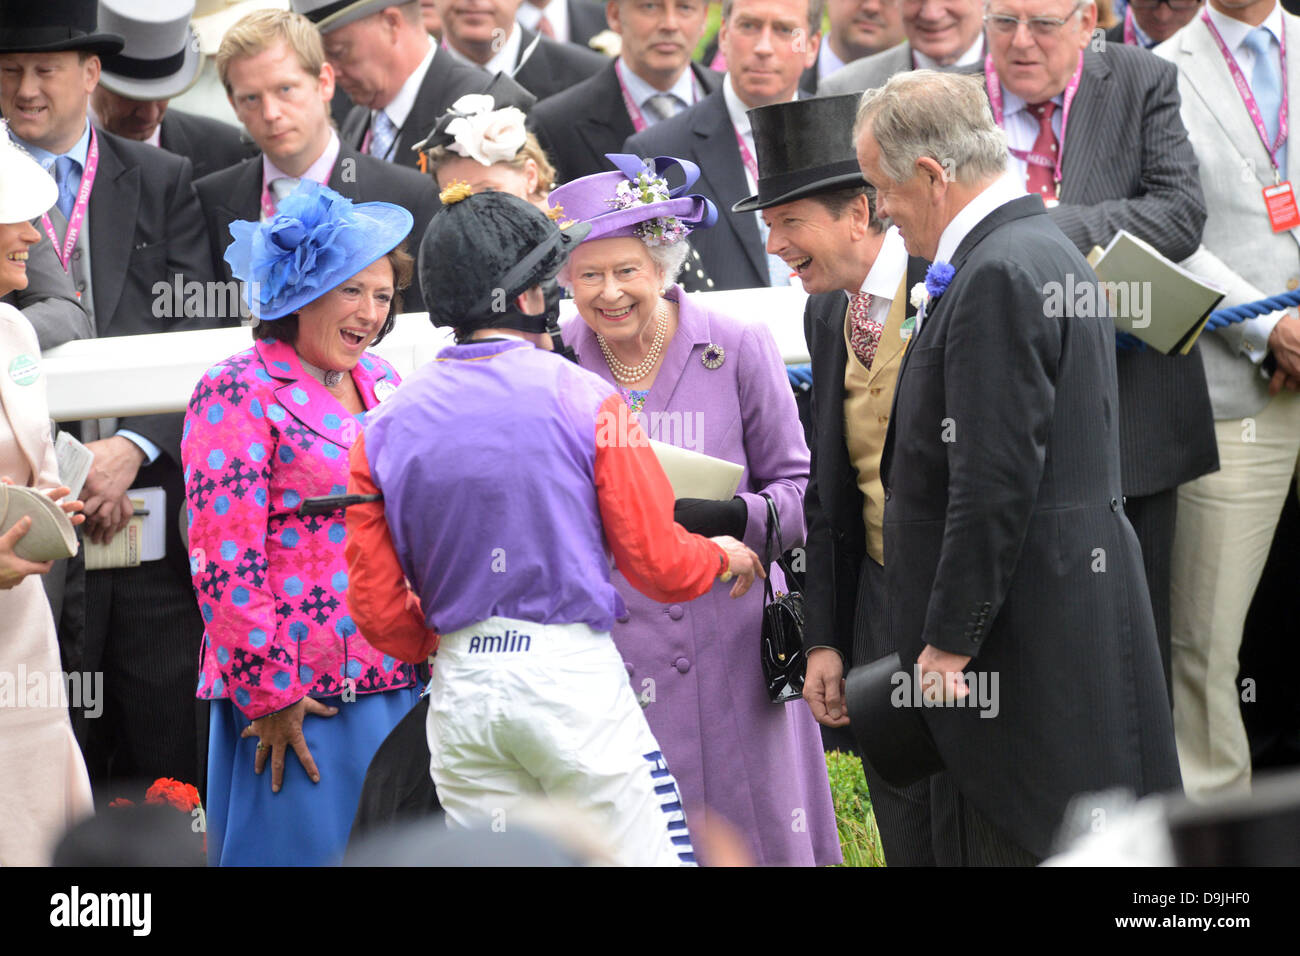 Ascot, Berkshire, UK. 20th June 2013.  HM Queen with jockey Ryan Moore after her horse Estimate won the Gold Cup on Ladies Day. Credit:  John Beasley/Alamy Live News Stock Photo